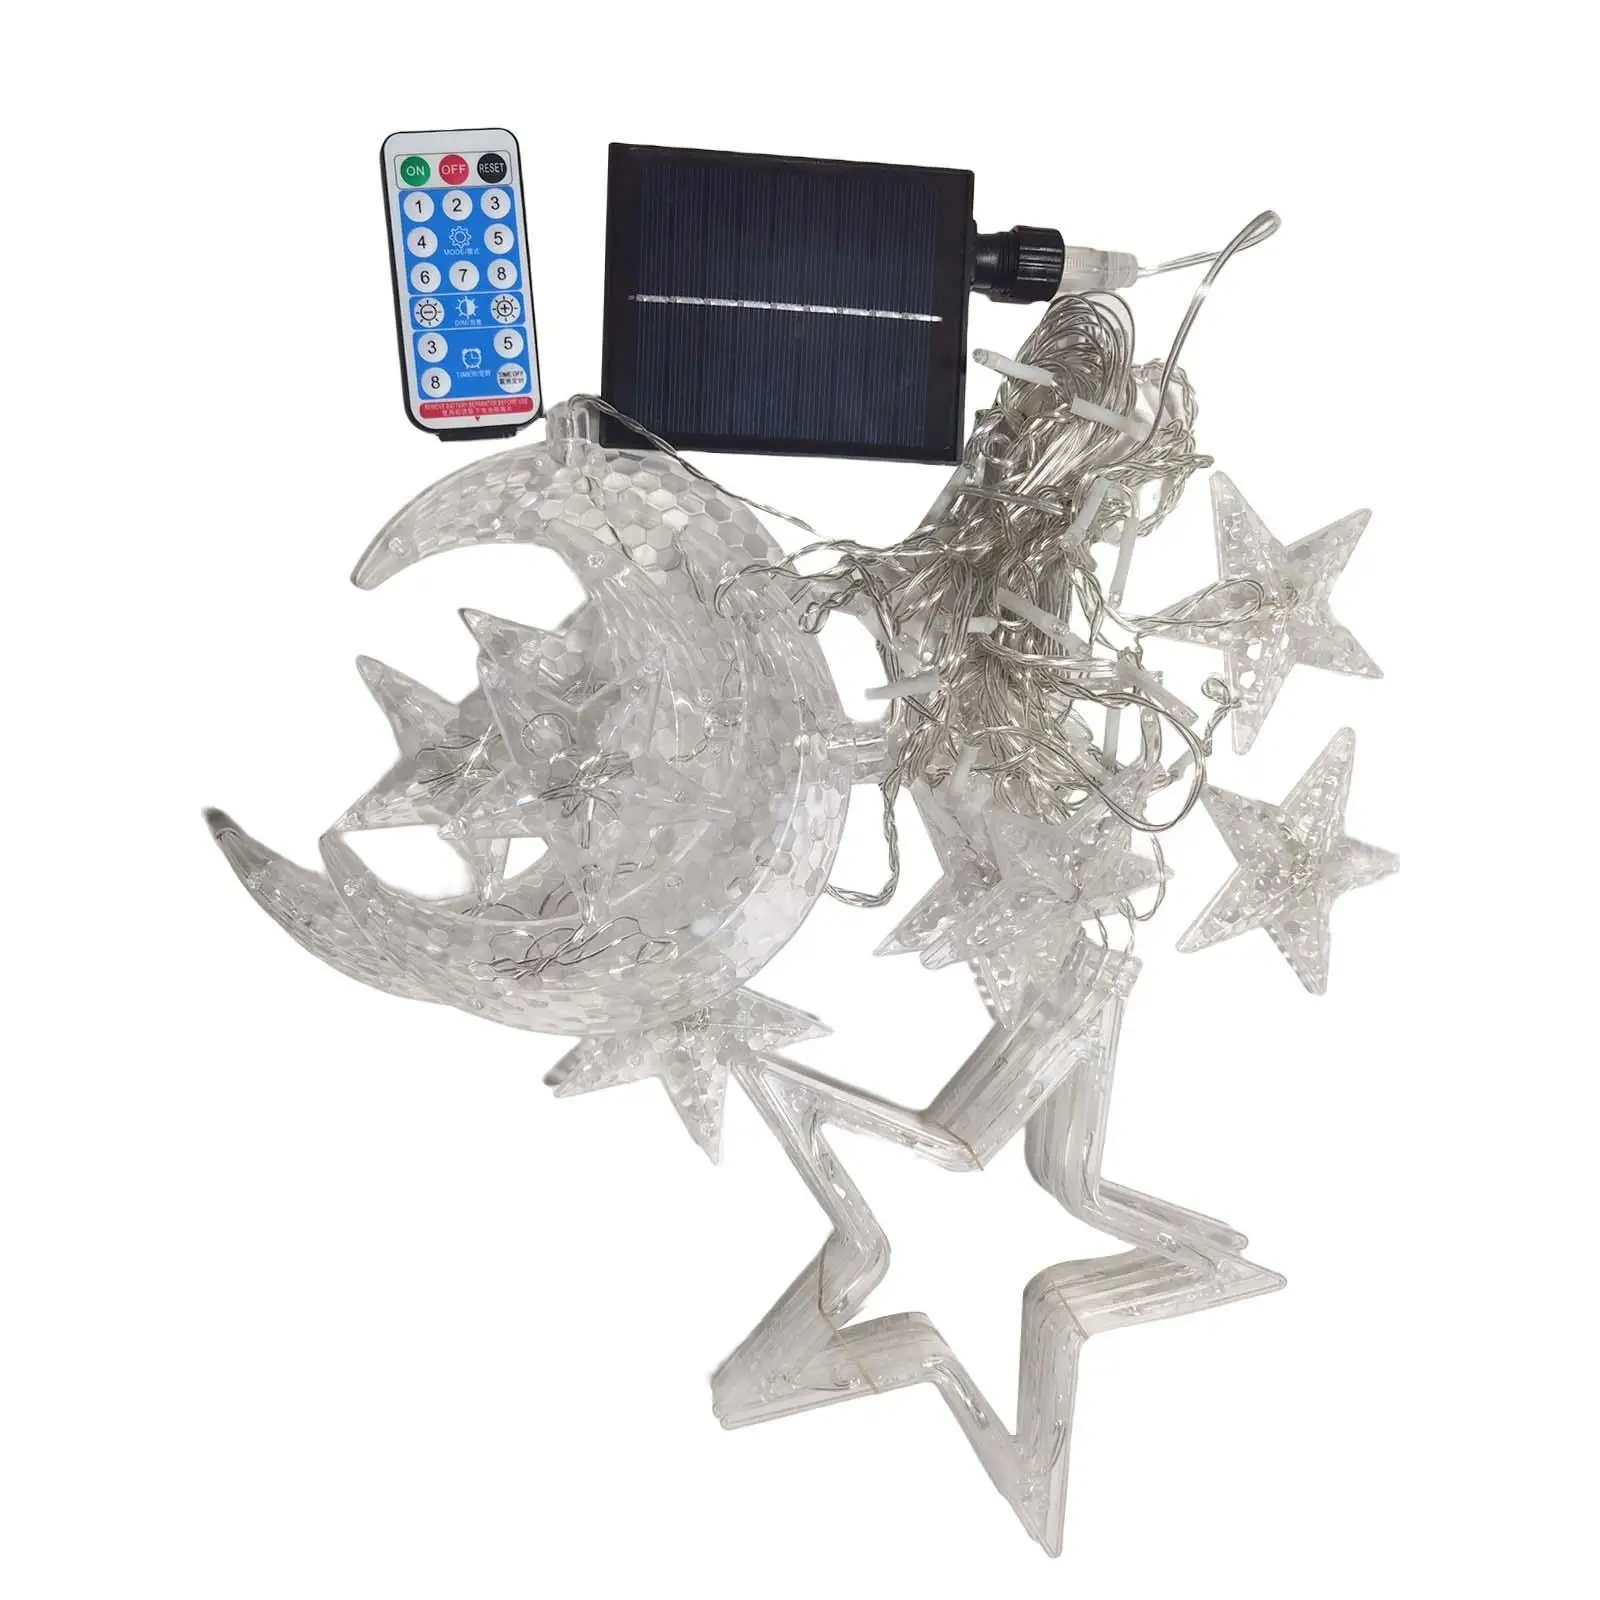 Solar Powered String Lights for Christmas New Year Home Decor Window Living Room